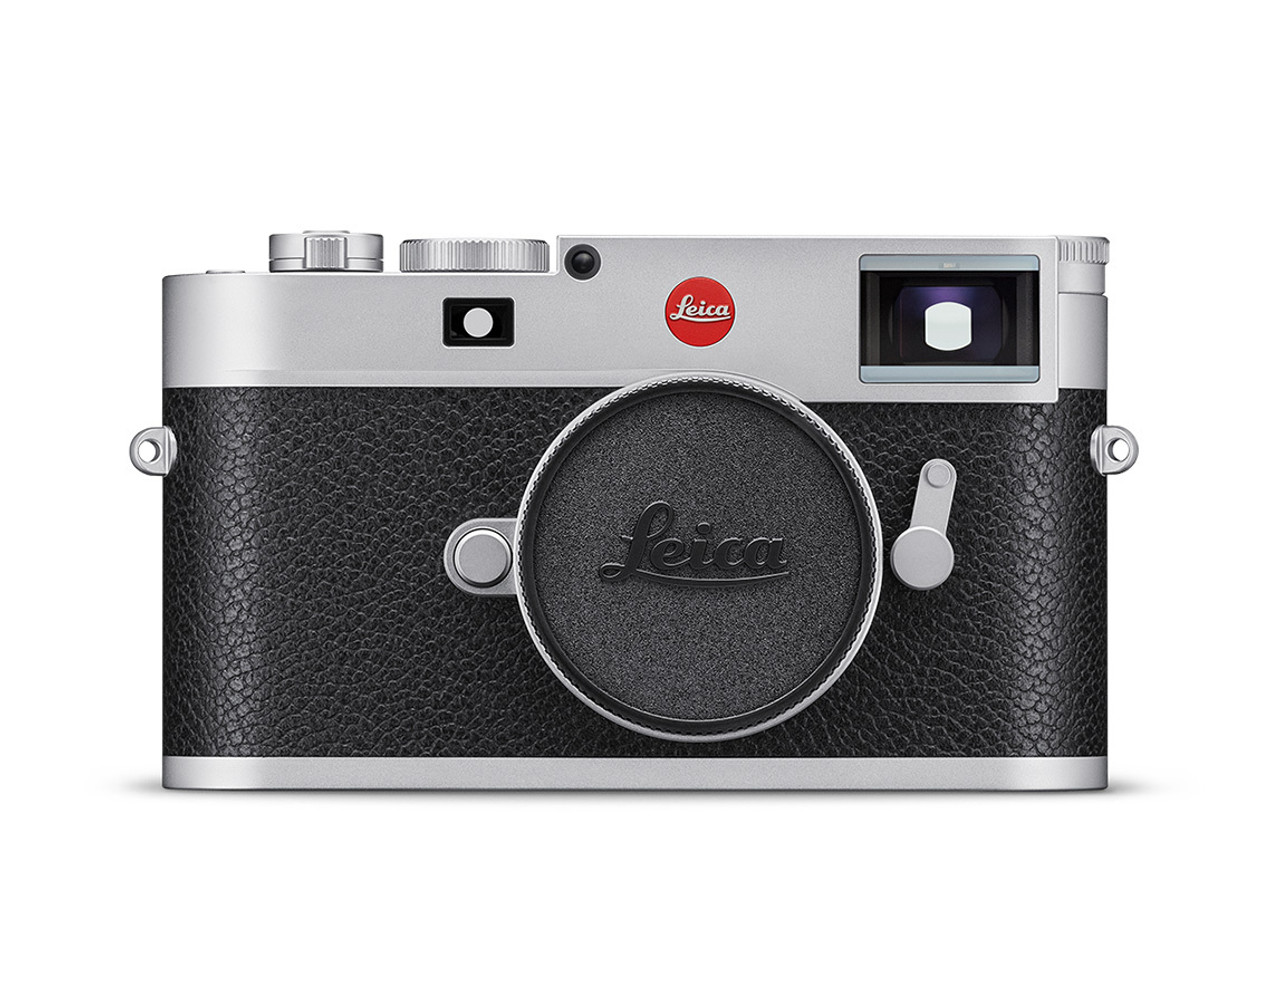 Withdrawn: Leica D-Lux 7 Silver pristine condition with extra